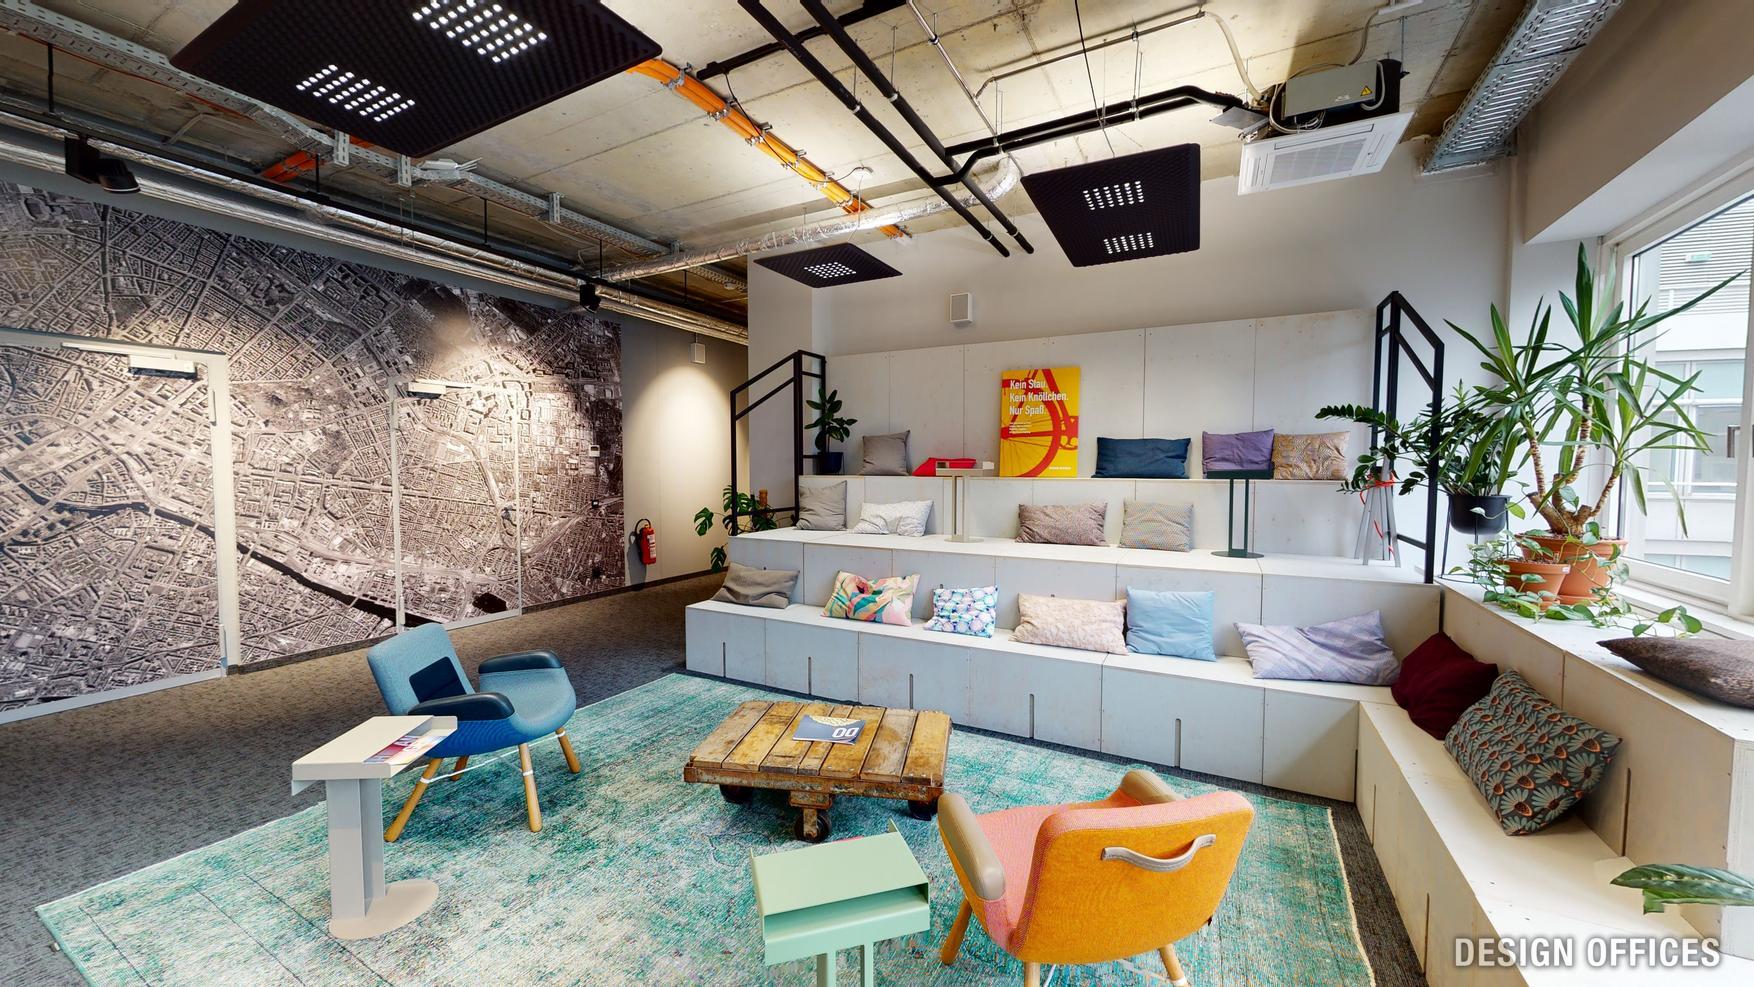 A creative, start-up style workspace that creates opportunity for collaboration with clients